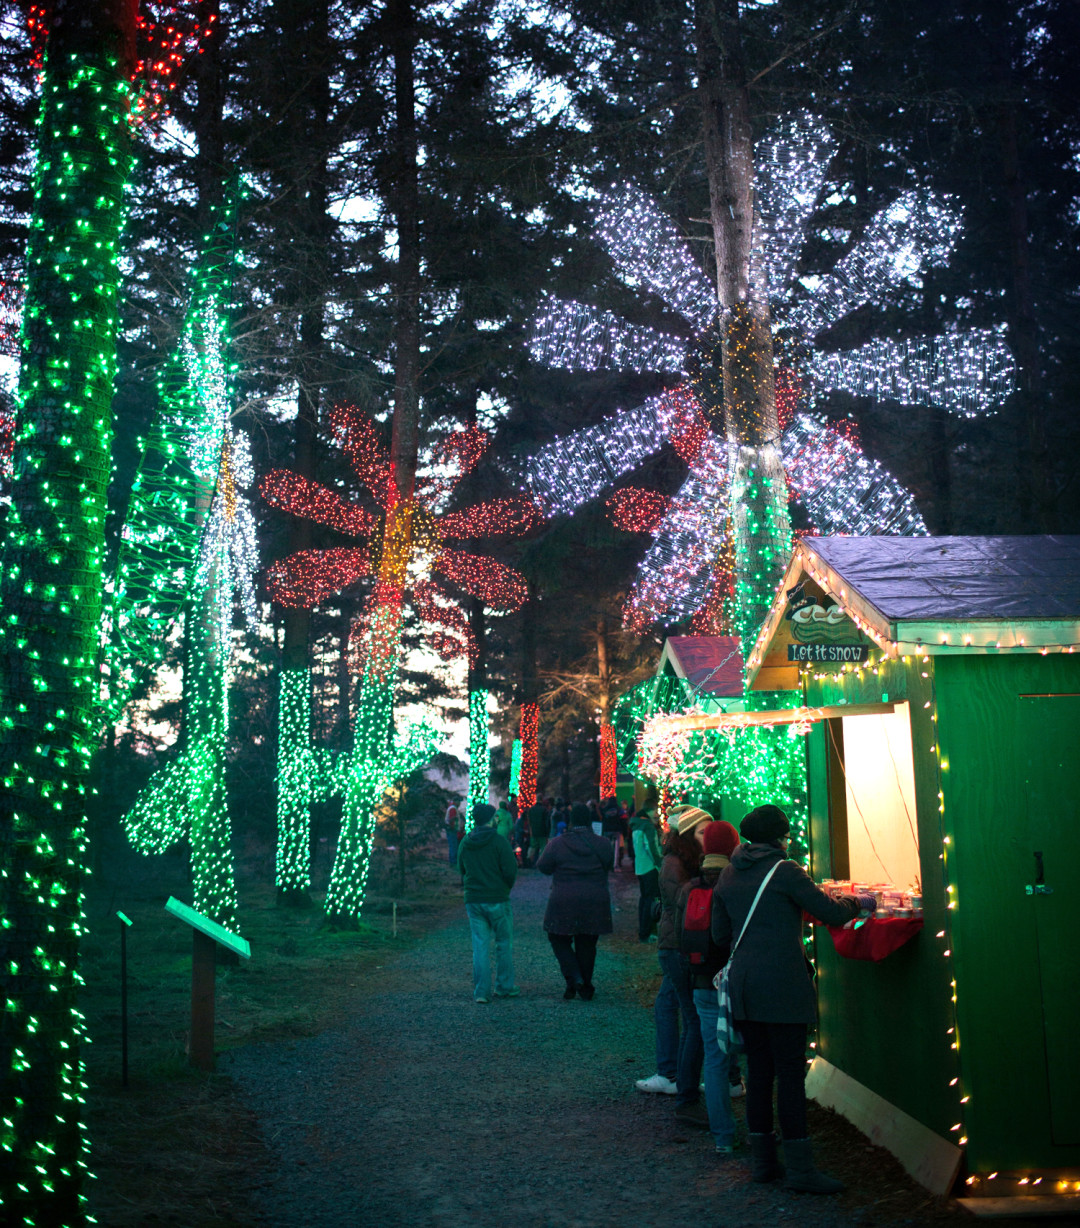 How to Spend a Merry, Mellow Holiday Weekend at the Oregon Garden